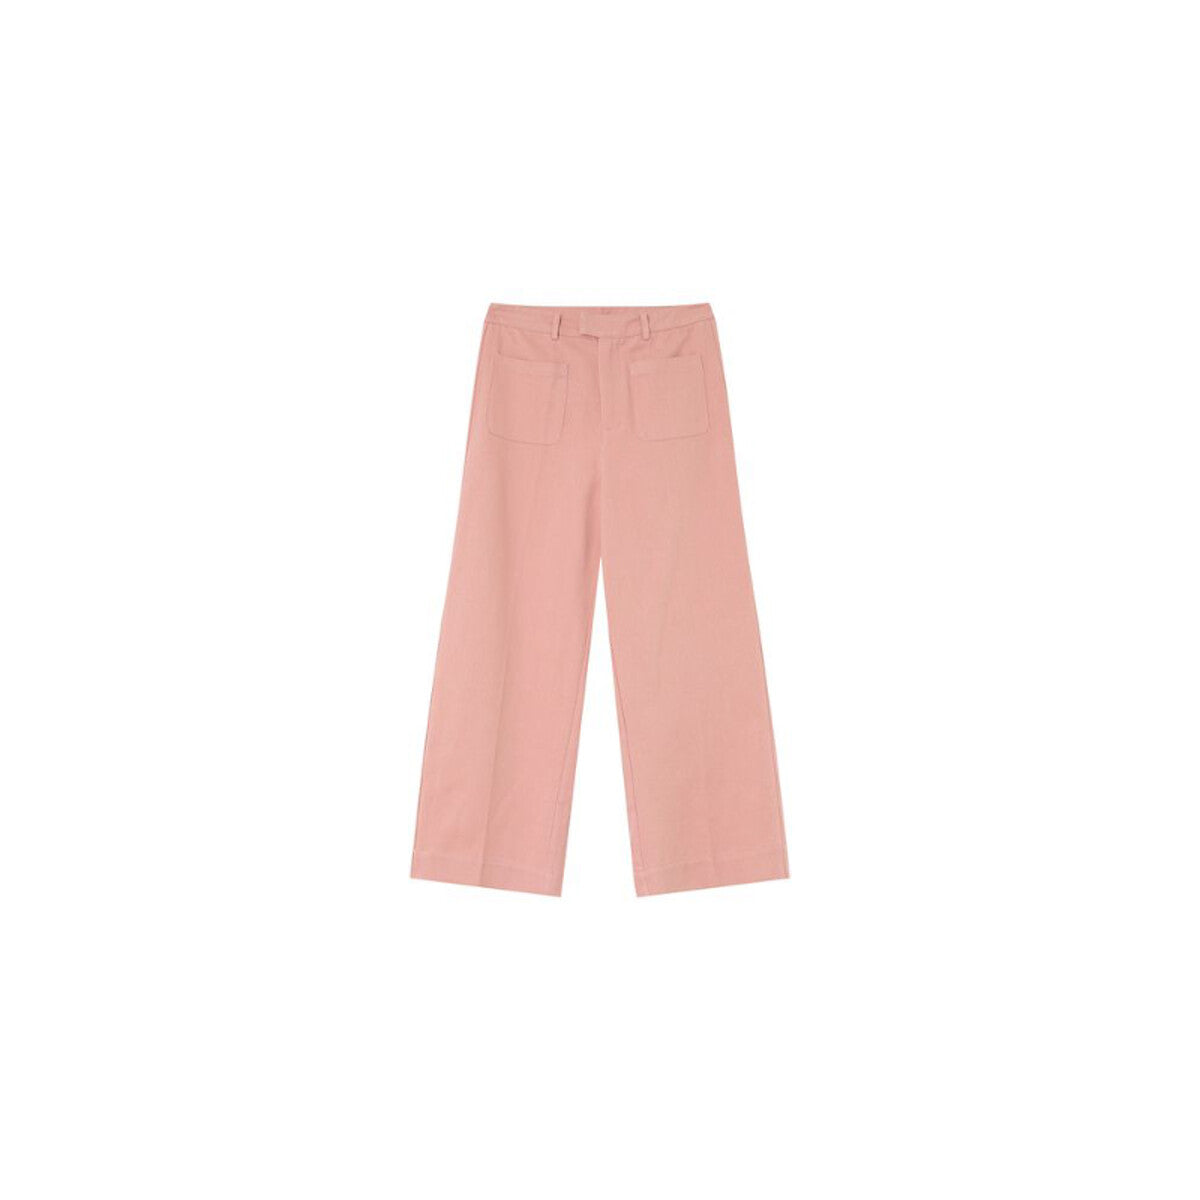 Maurice trousers in rose